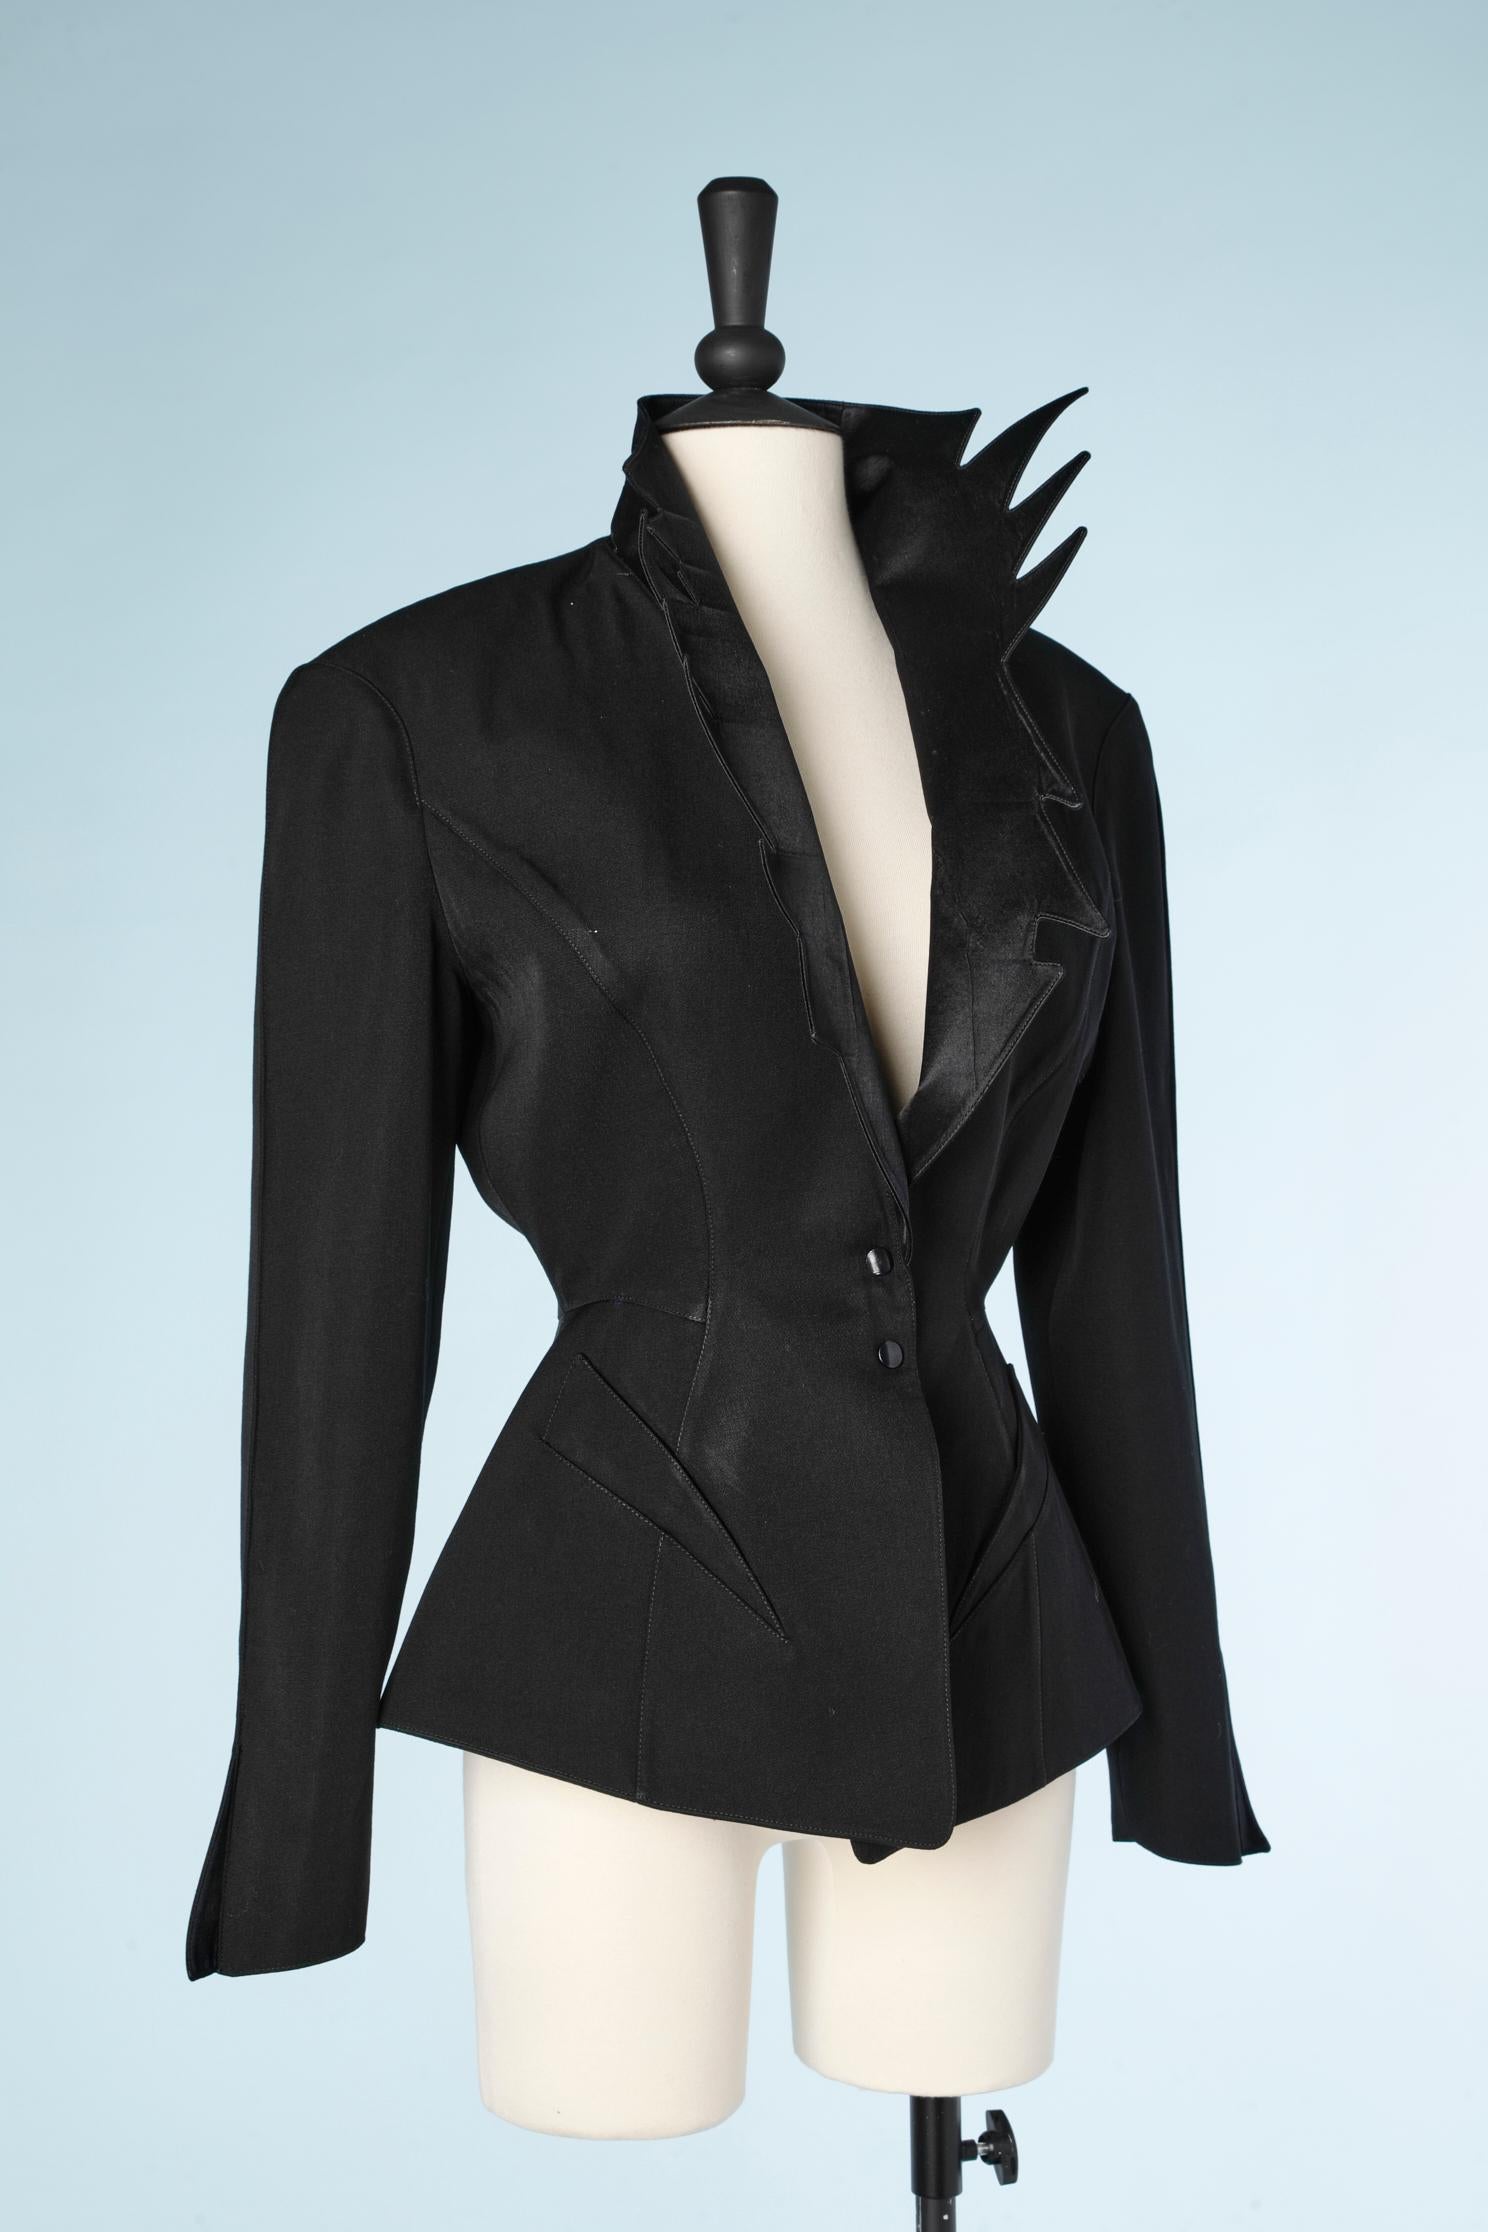  Black jacket with notched satin collar  Thierry Mugler  For Sale 2